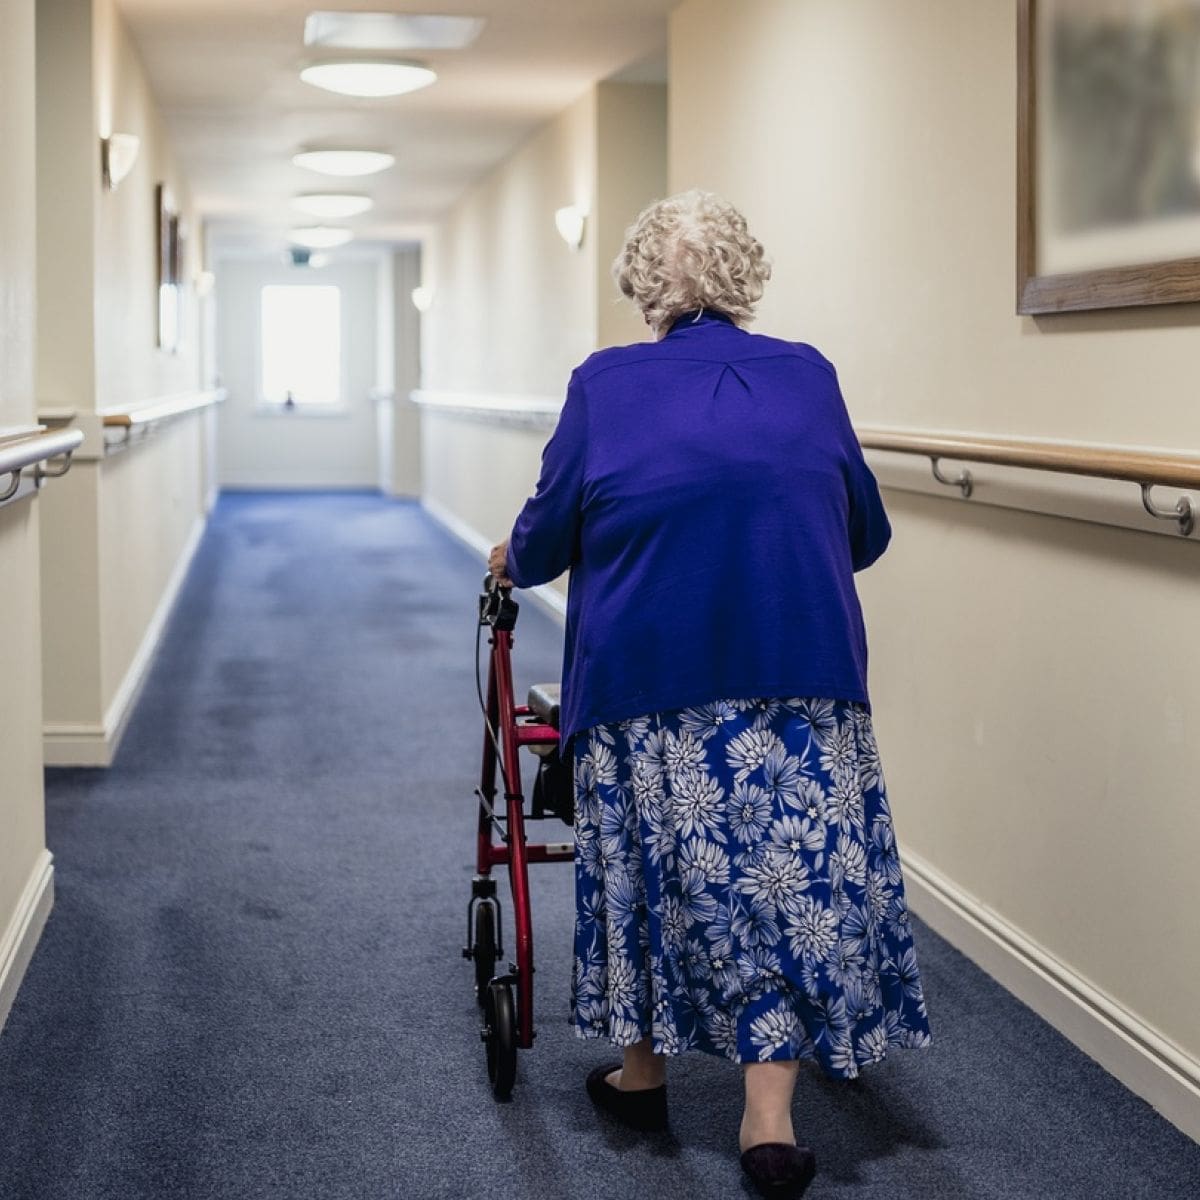 australian-care-home-residents-may-have-died-from-neglect-after-staff-were-furloughed